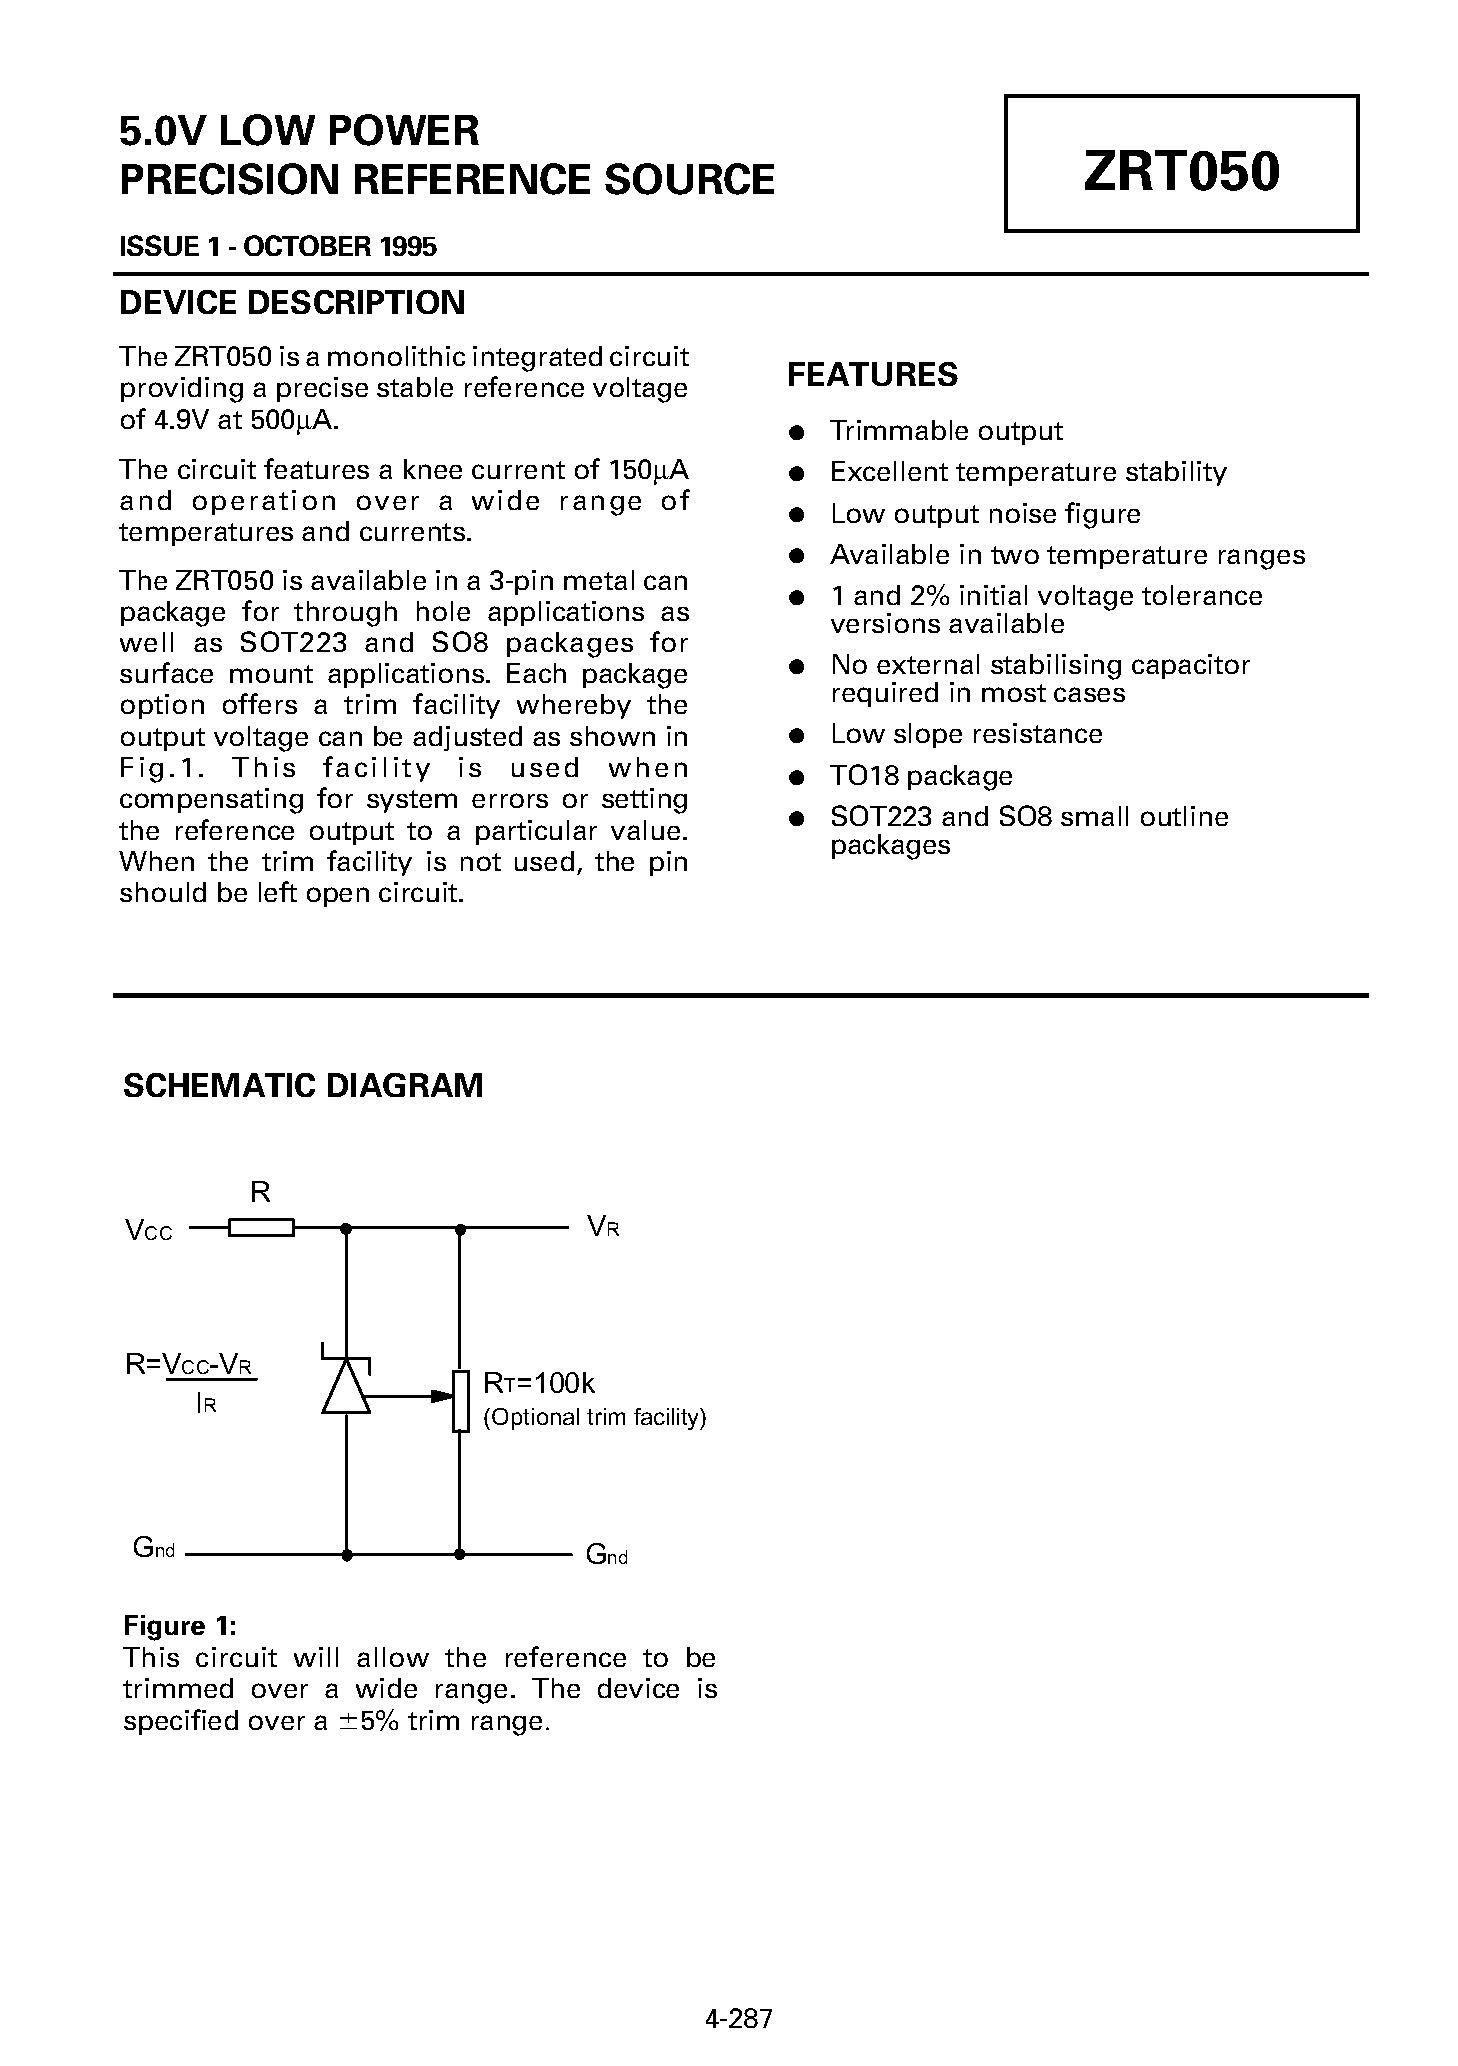 Datasheet ZRT050GC1 - 5.0V LOW POWER PRECISION REFERENCE SOURCE page 1